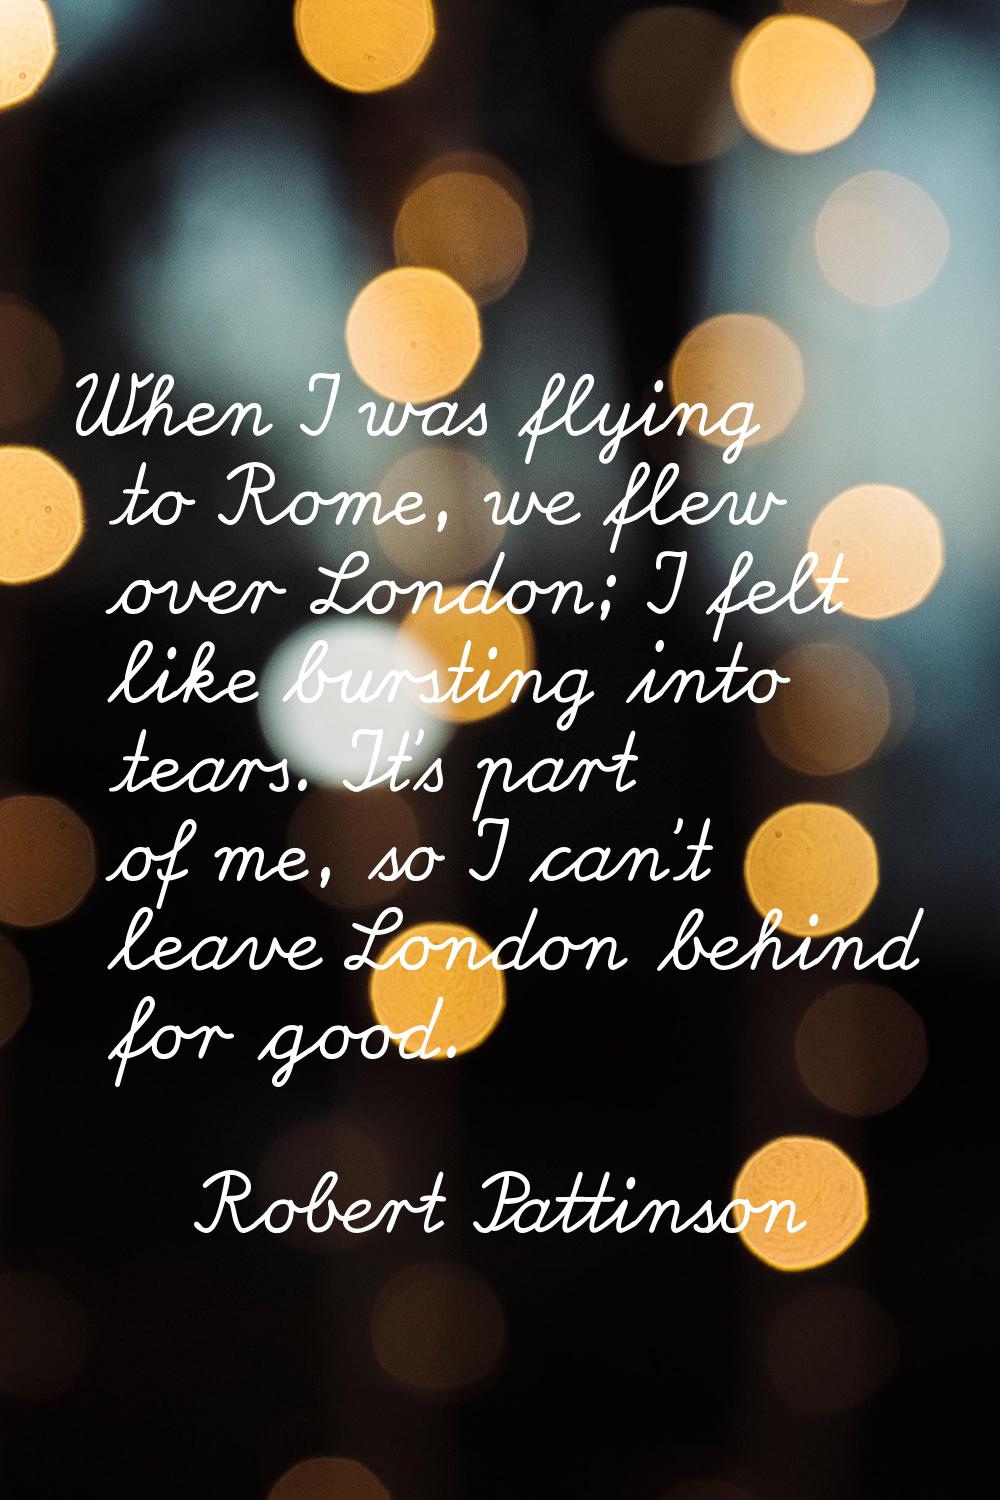 When I was flying to Rome, we flew over London; I felt like bursting into tears. It's part of me, s